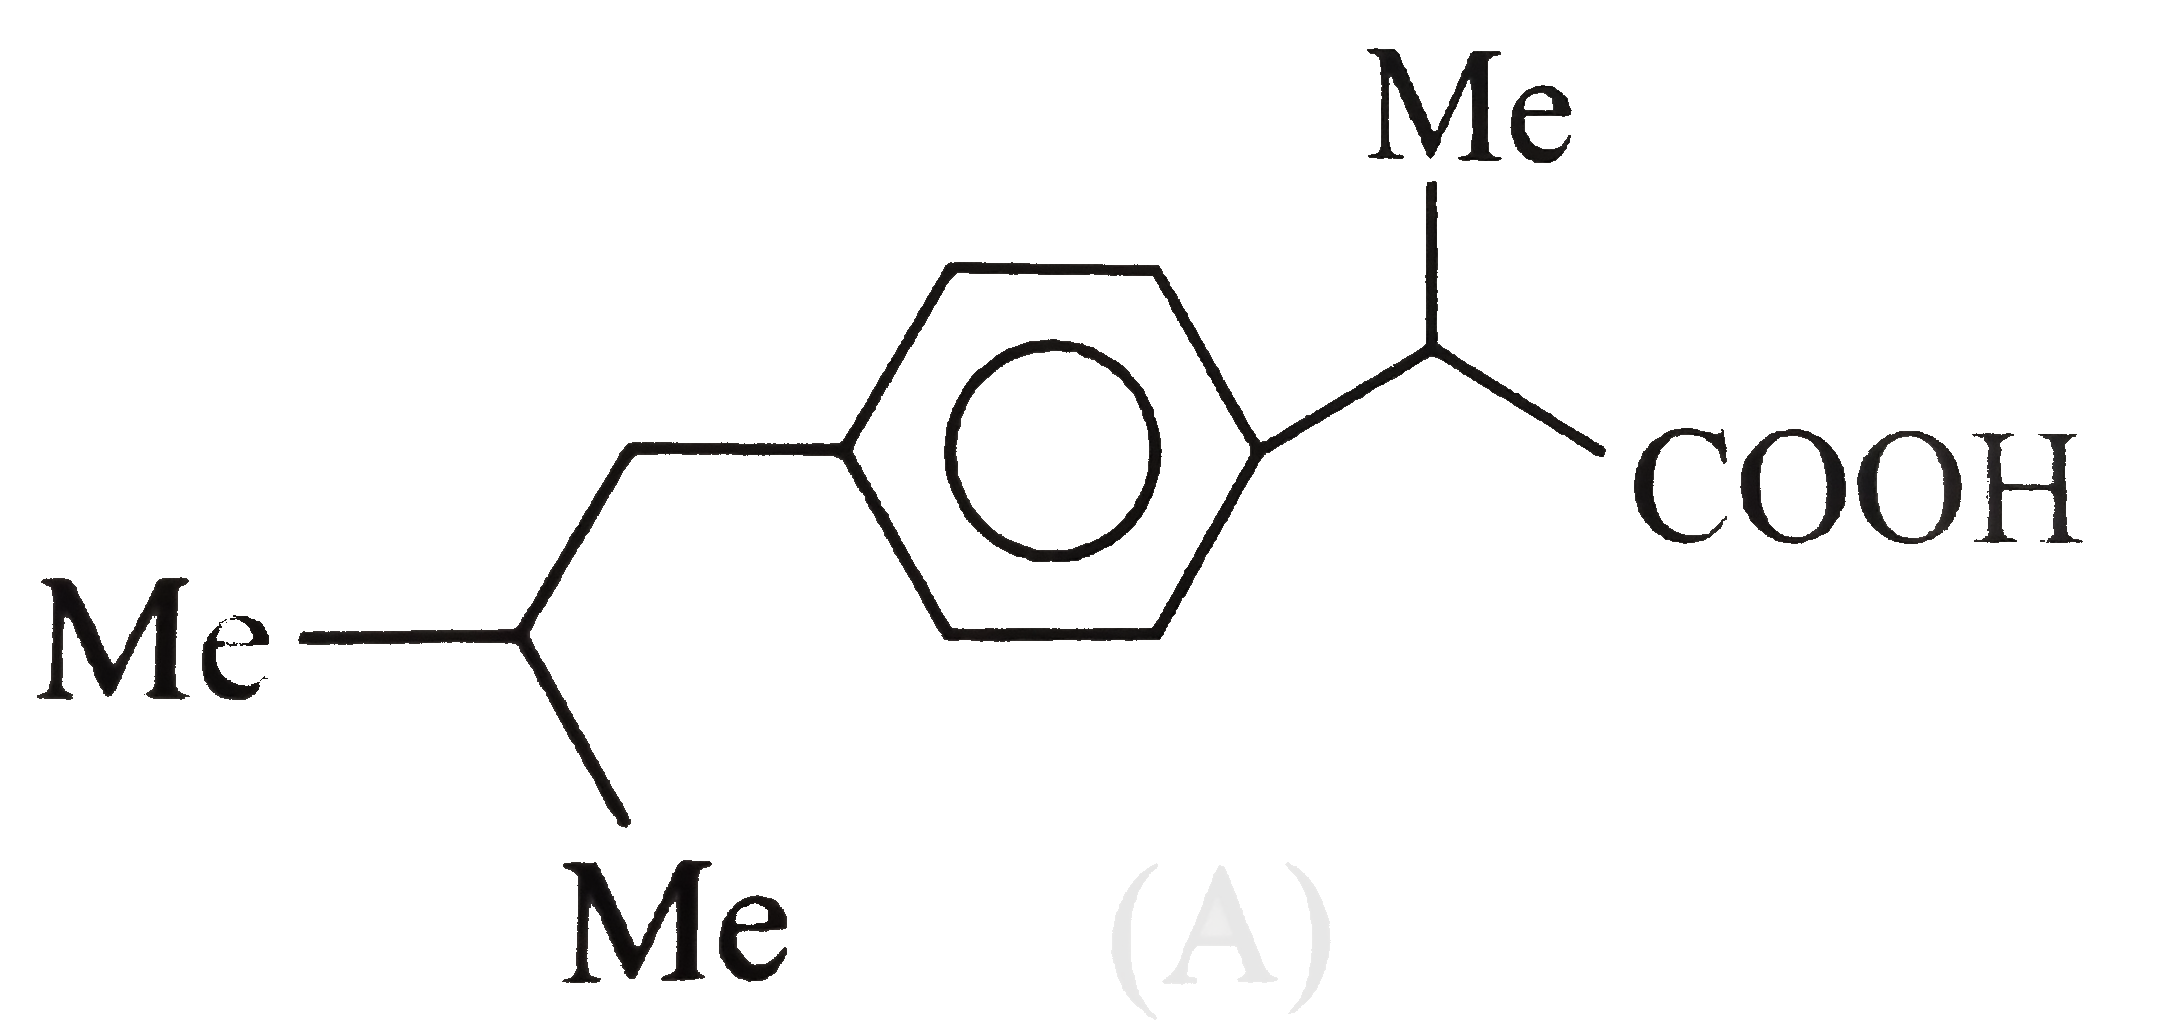 The analgesic drug ibuprofen (A) is chiral and exists in (+) and (-) froms. One enantiomer is physiologically active, while the other is inactive. The other is inactive. The structure of ibuprofen is given below.      The IUPAC name of (A) is: